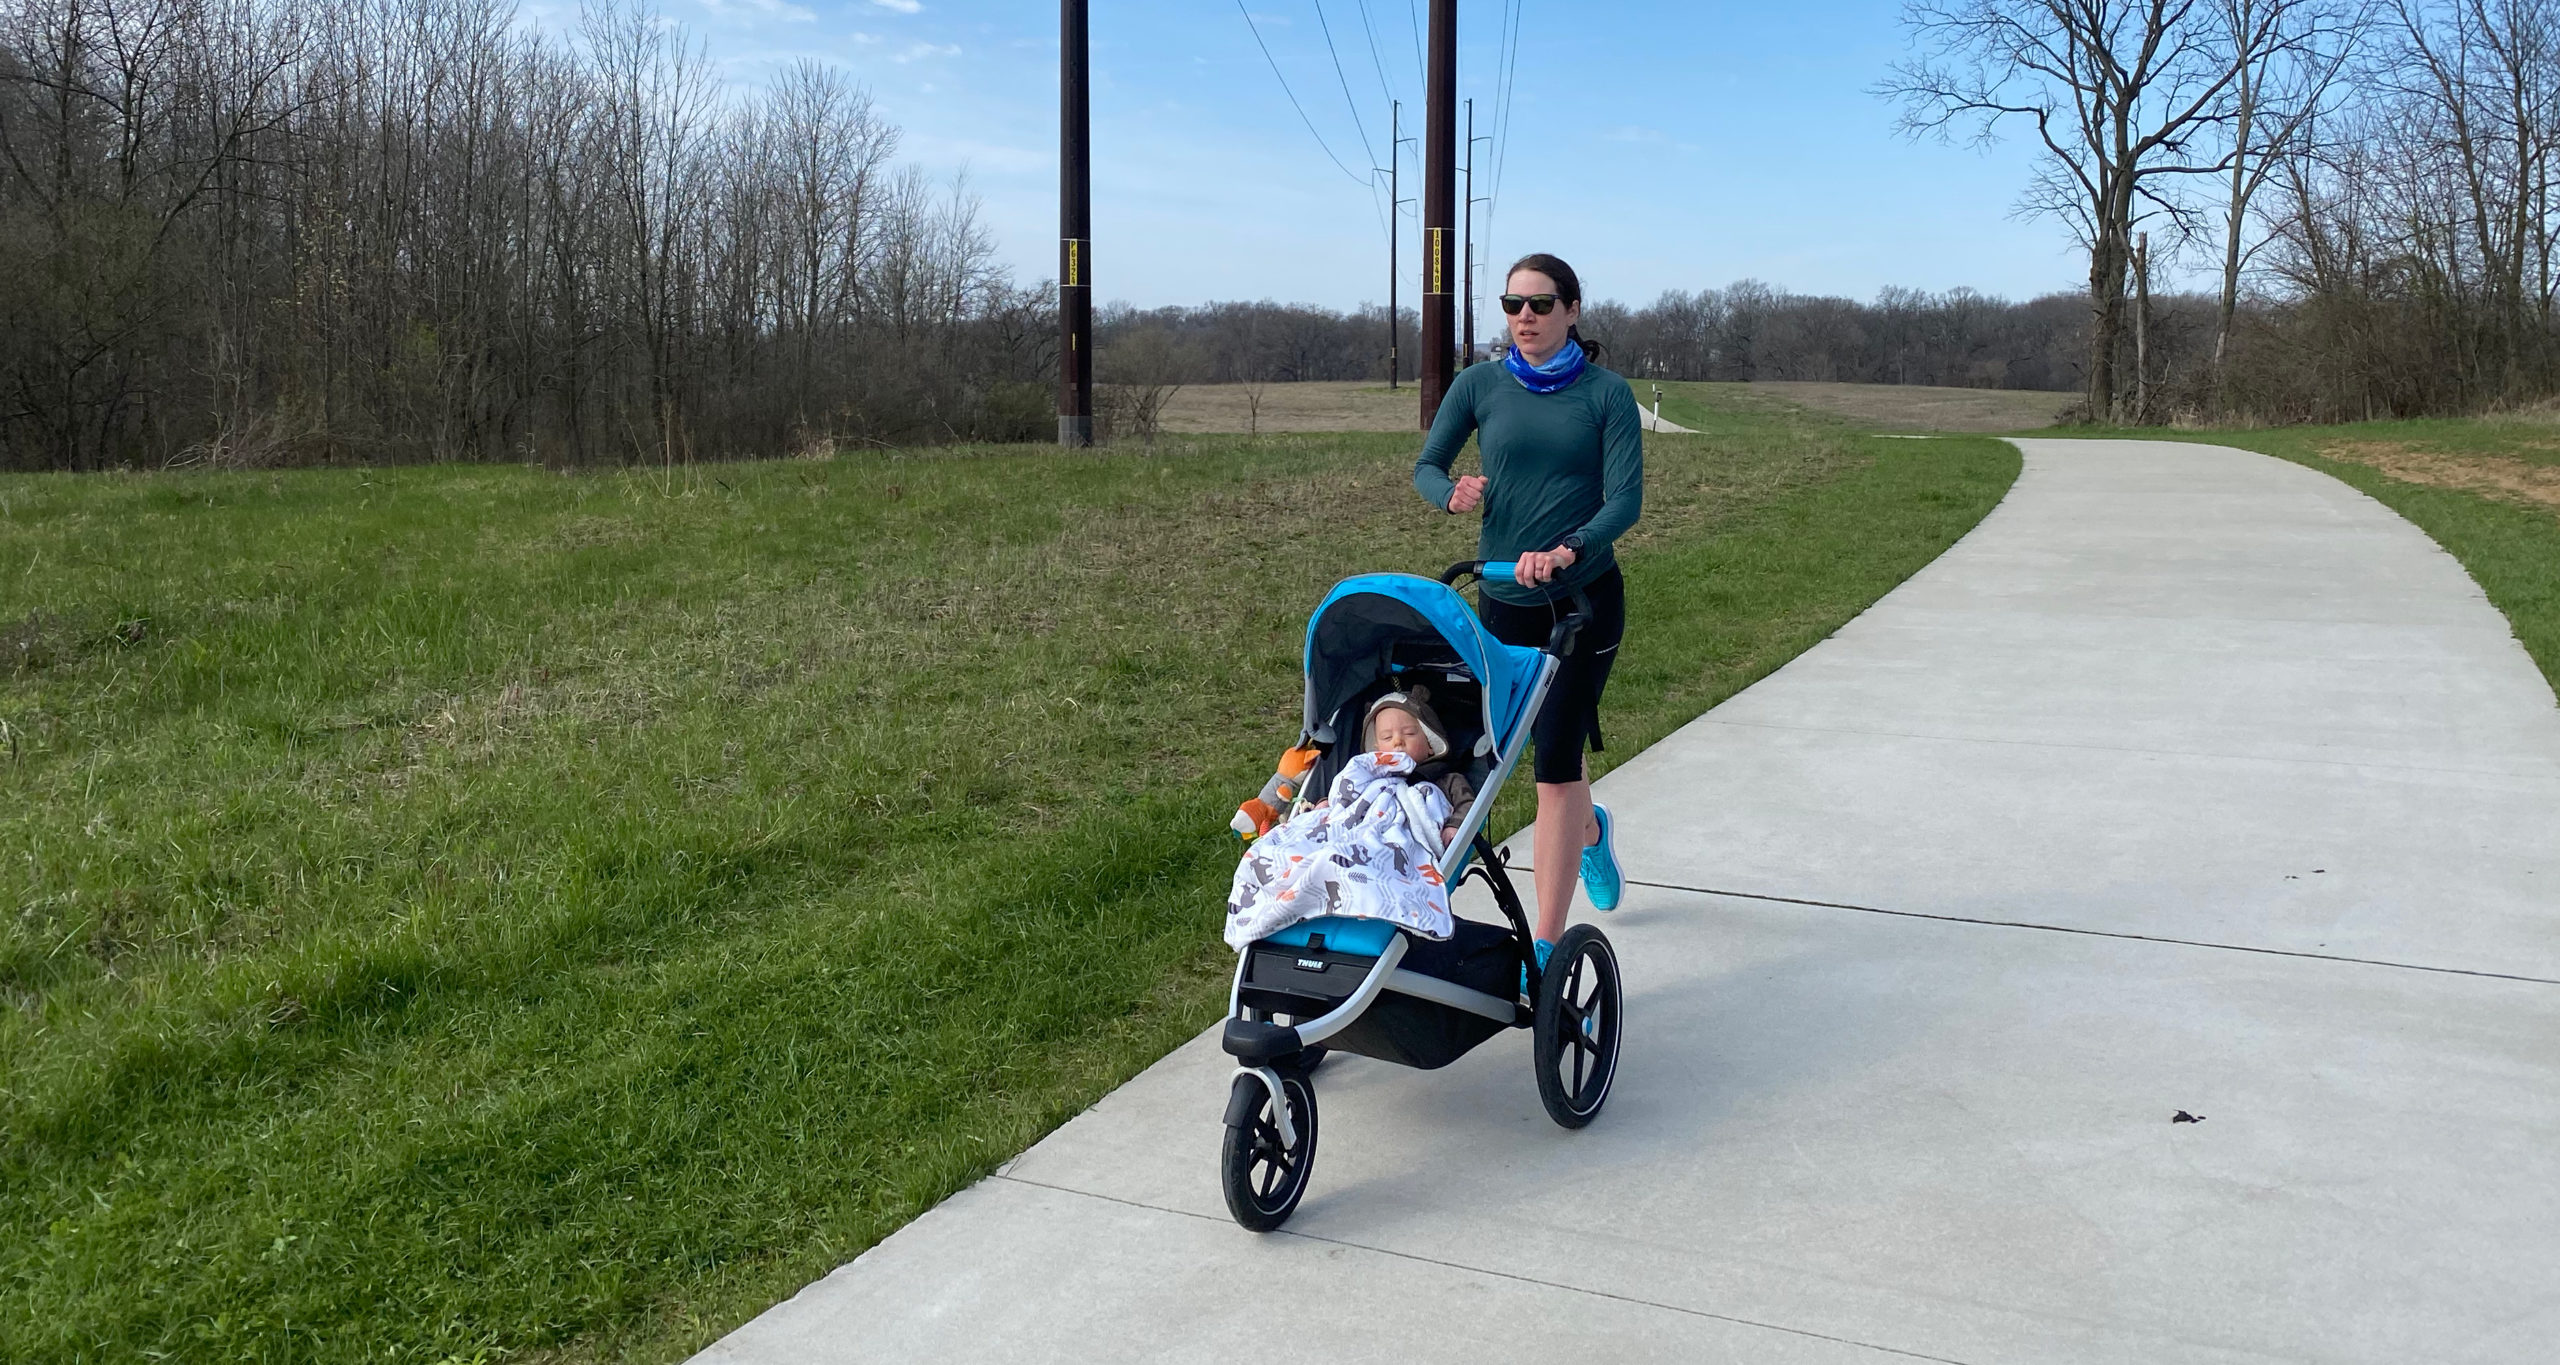 Laura Norris walking with her baby in a stroller, post-partum depression, mental health, depression recovery, coping with mental illness